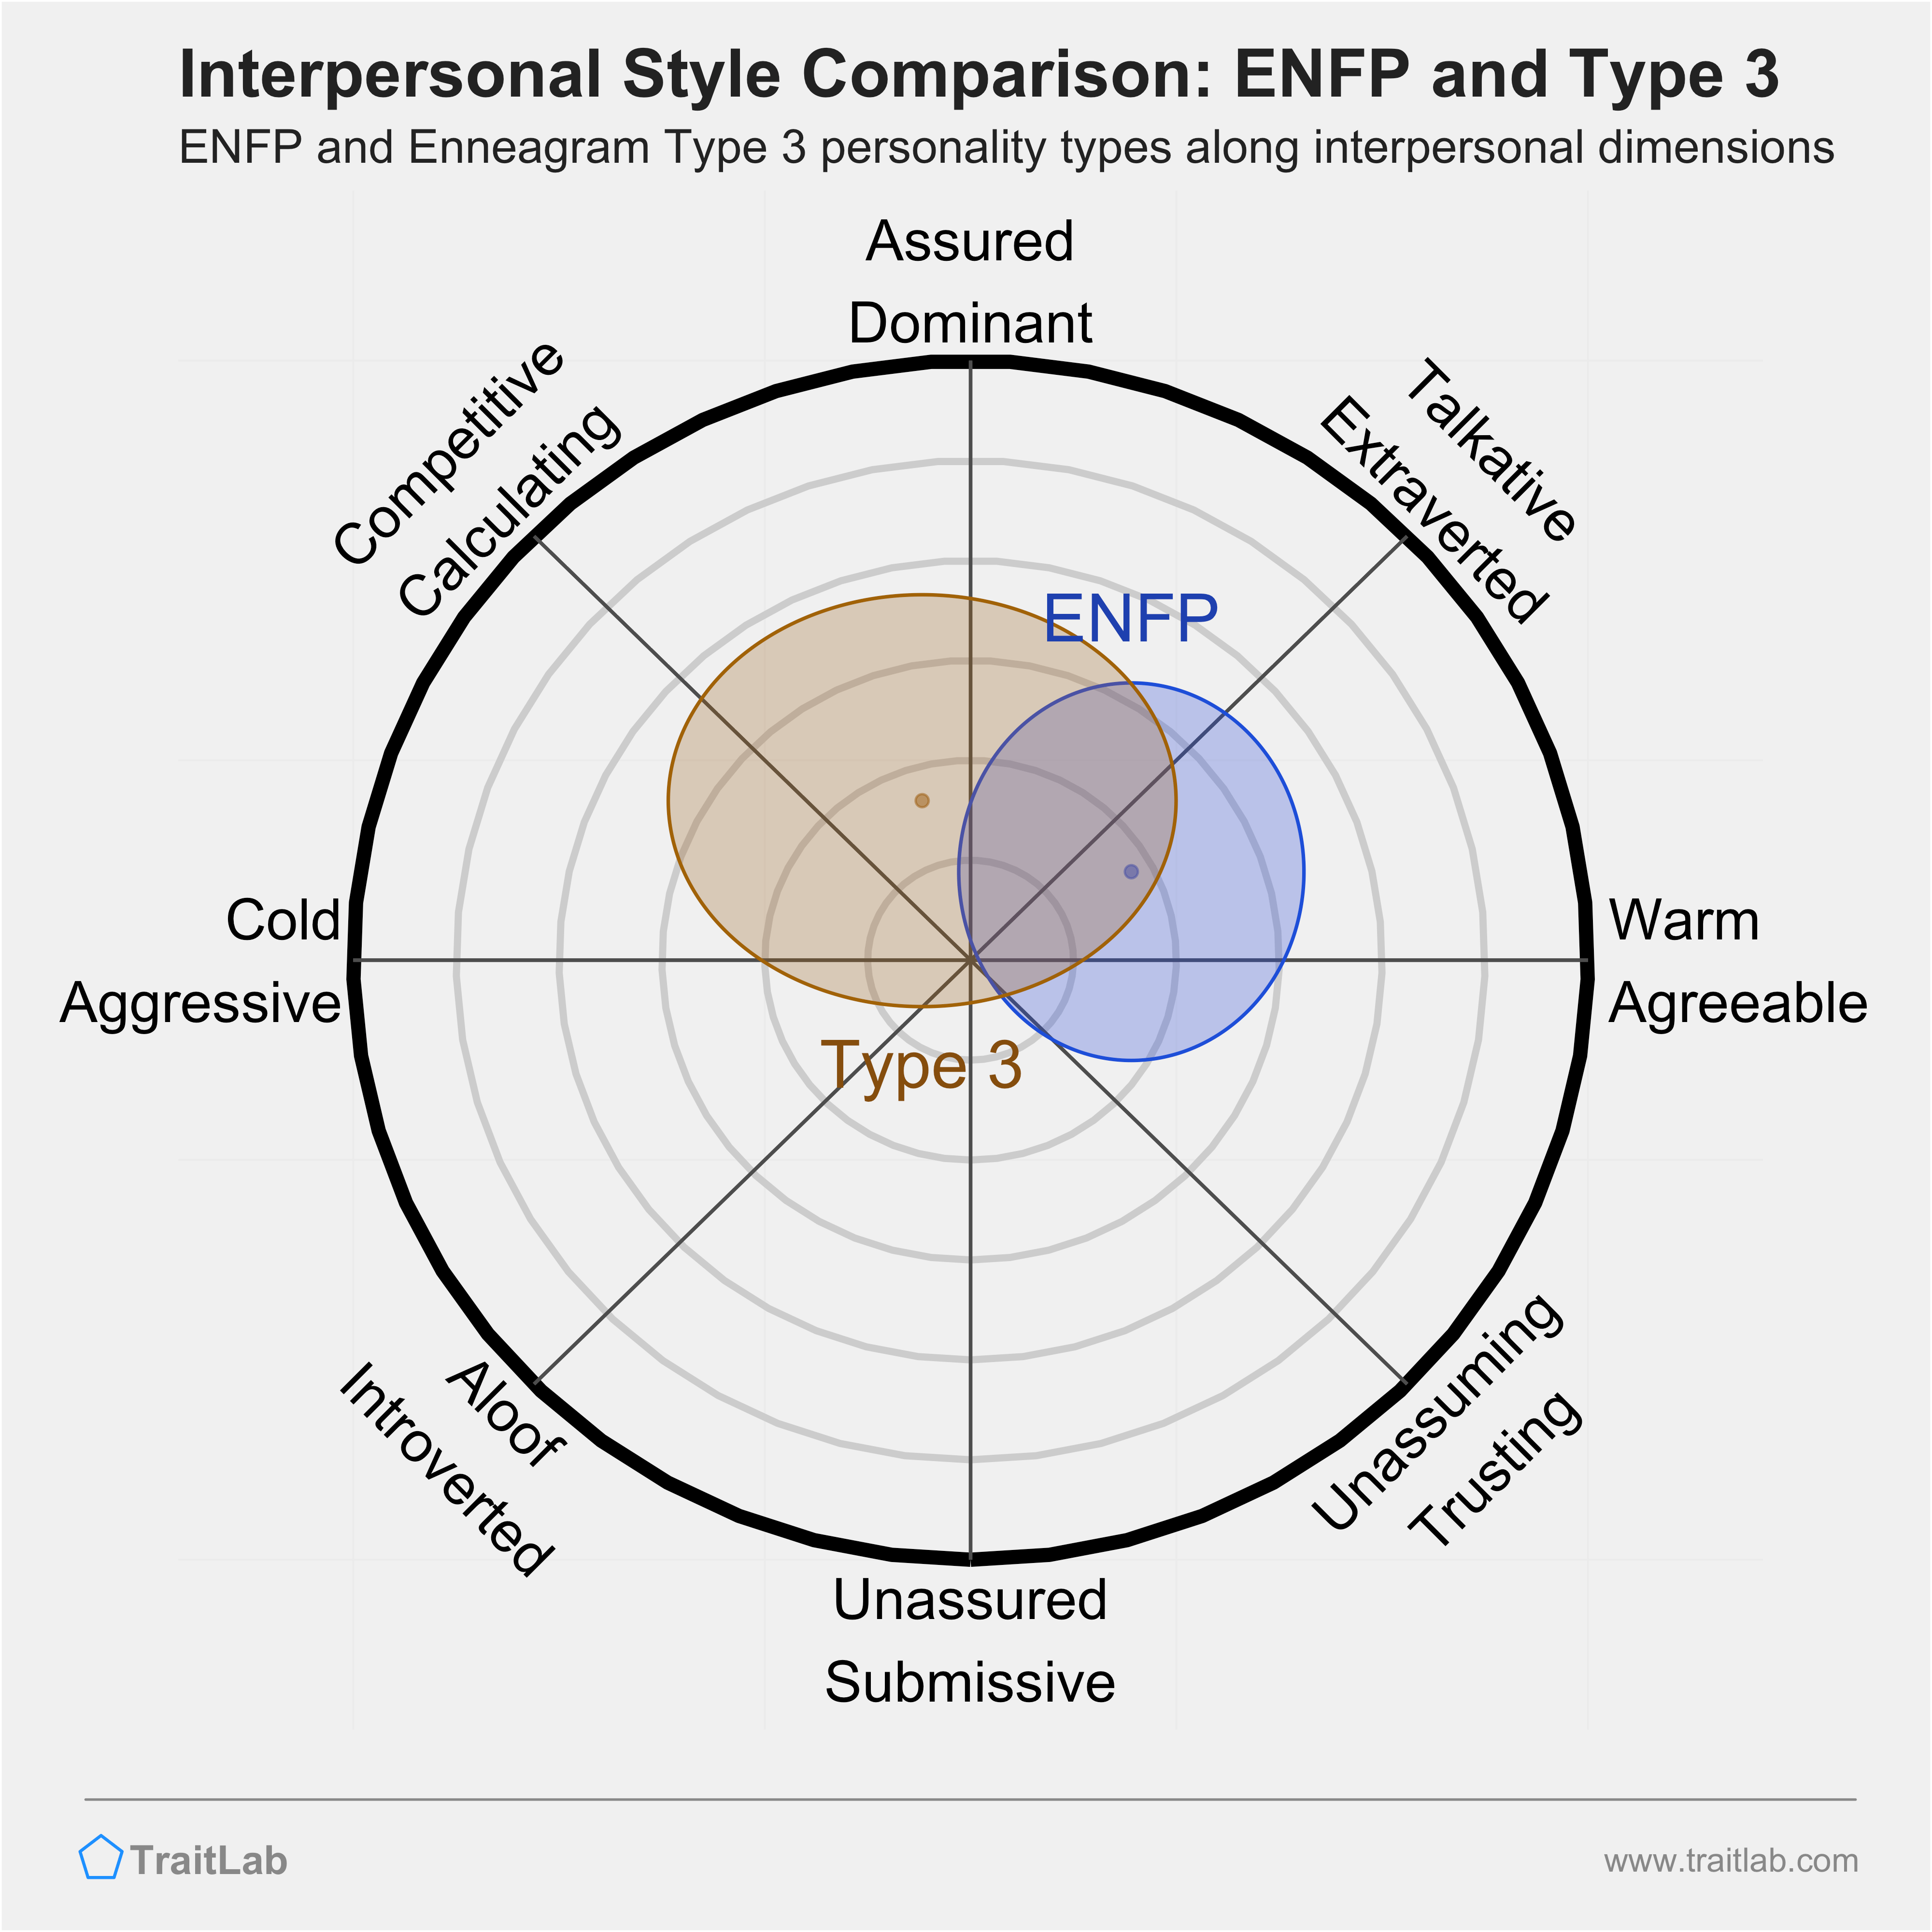 Enneagram ENFP and Type 3 comparison across interpersonal dimensions